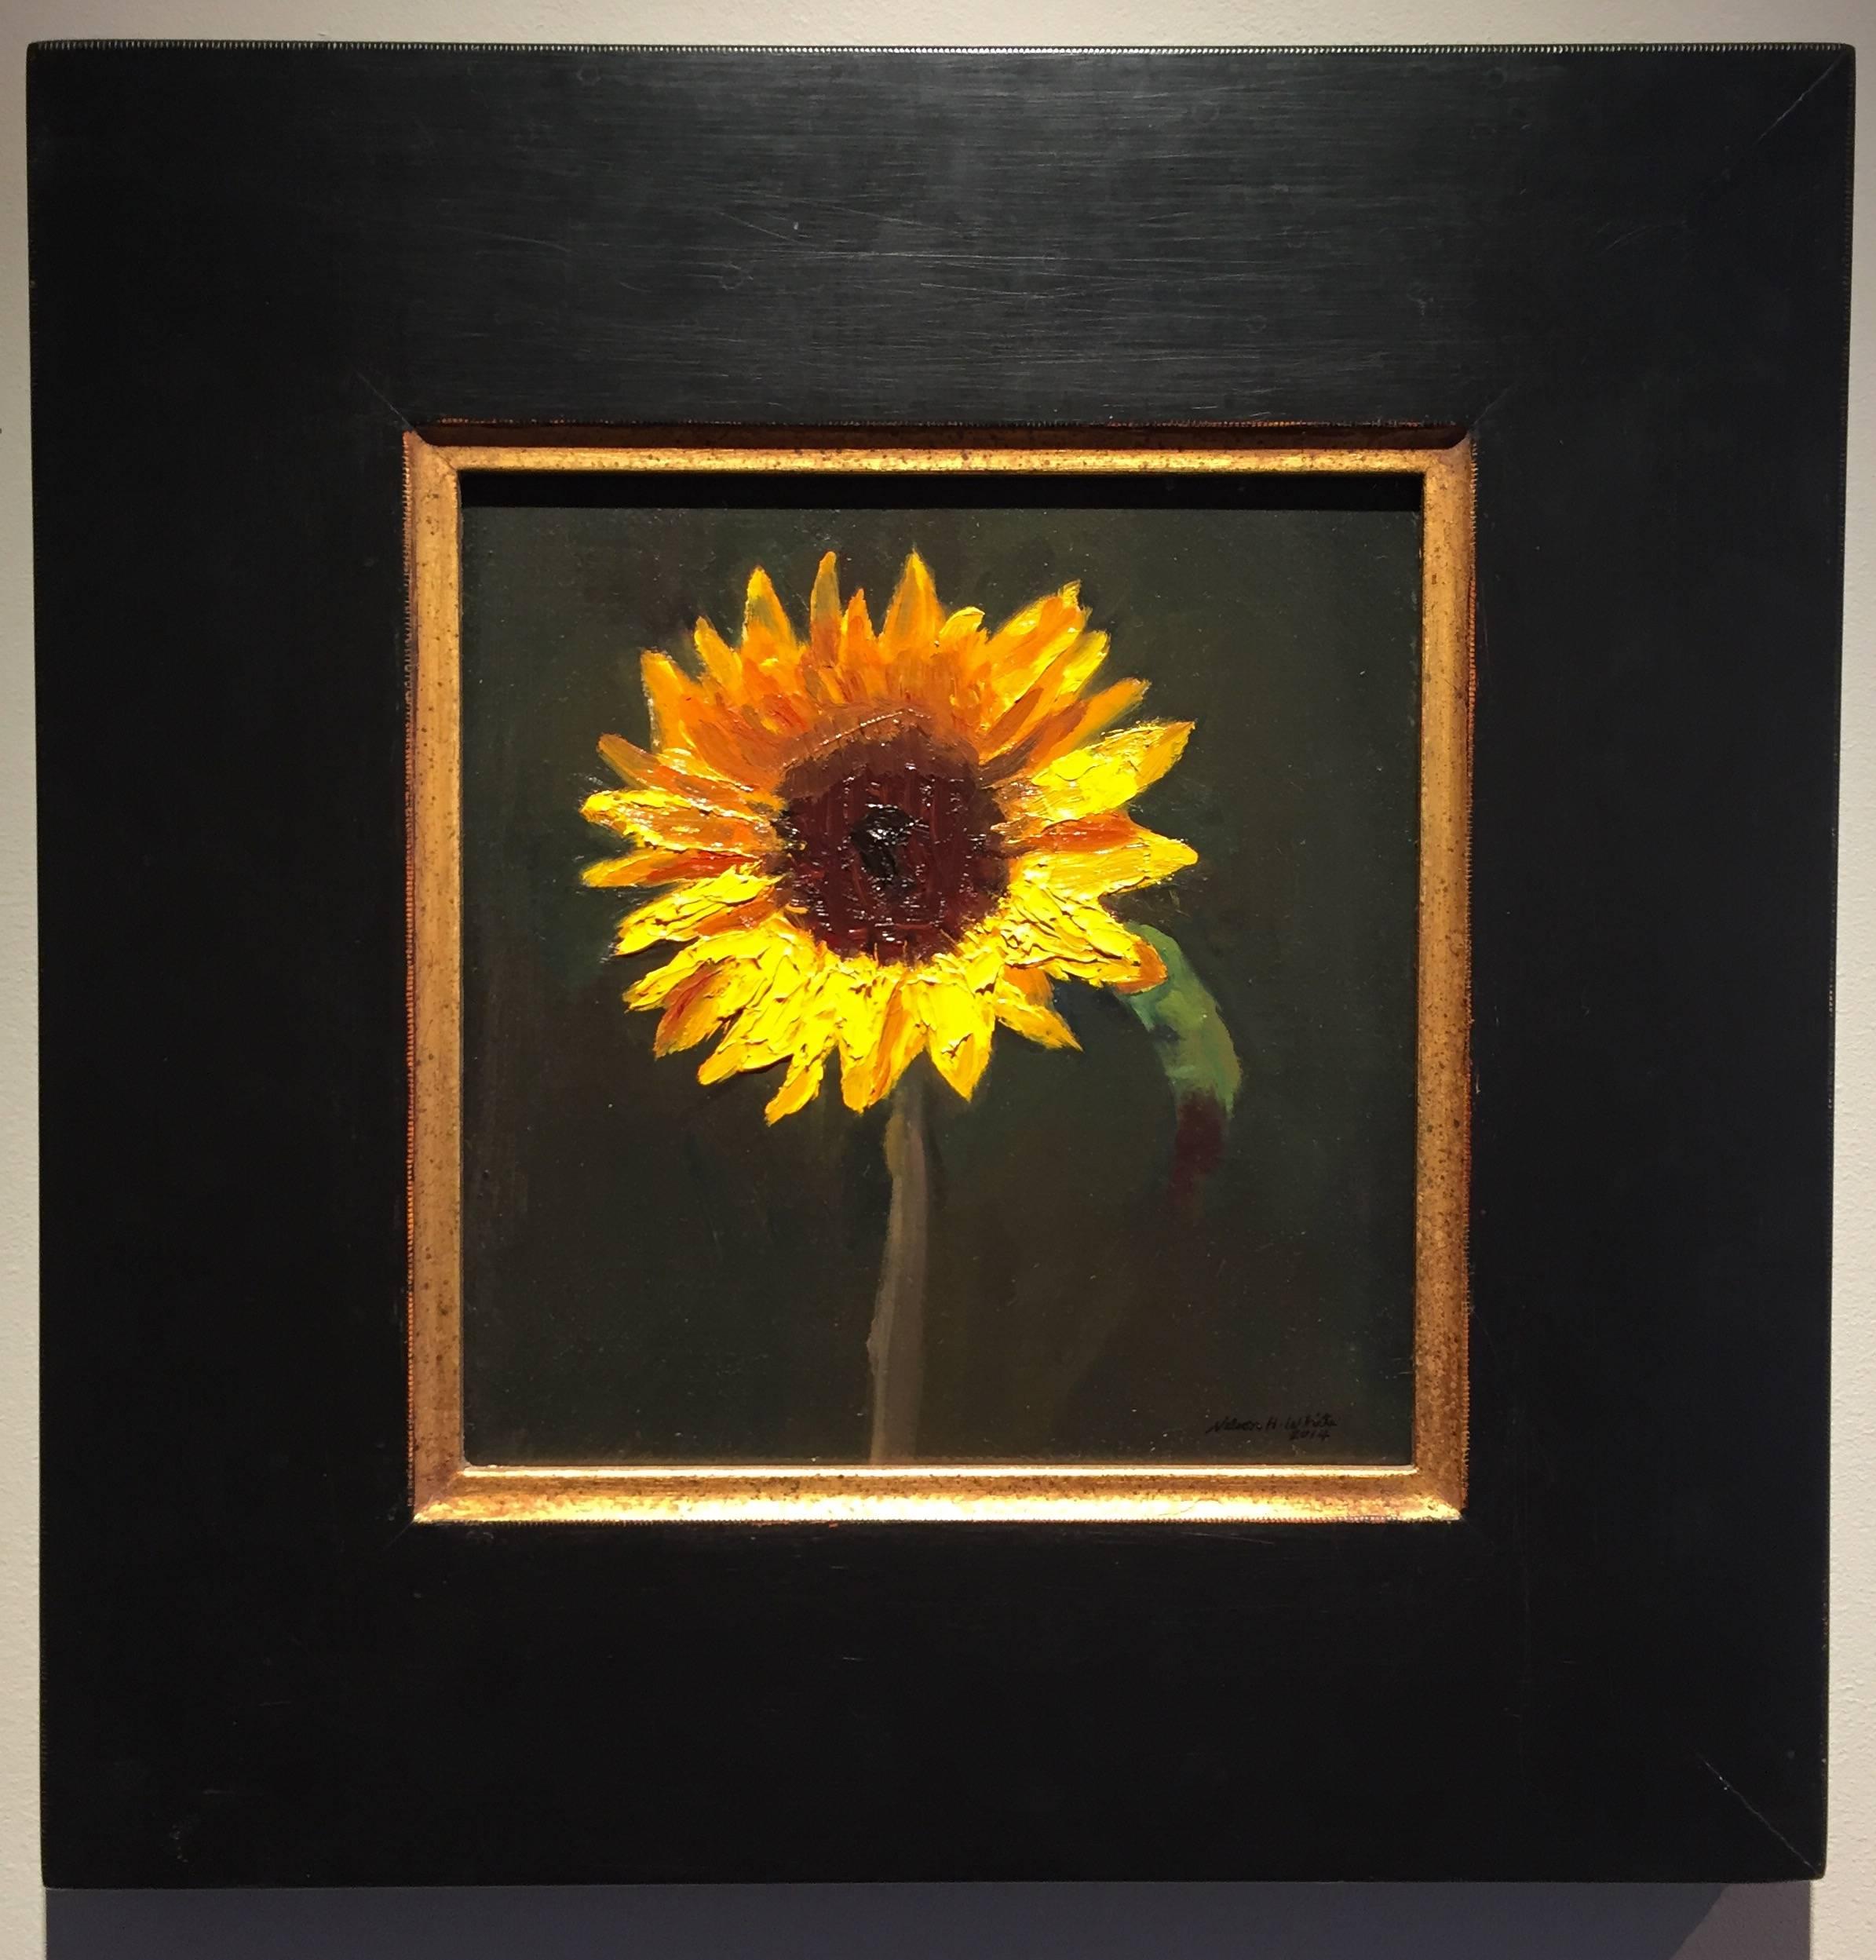 The Sunflower - Painting by Nelson H. White